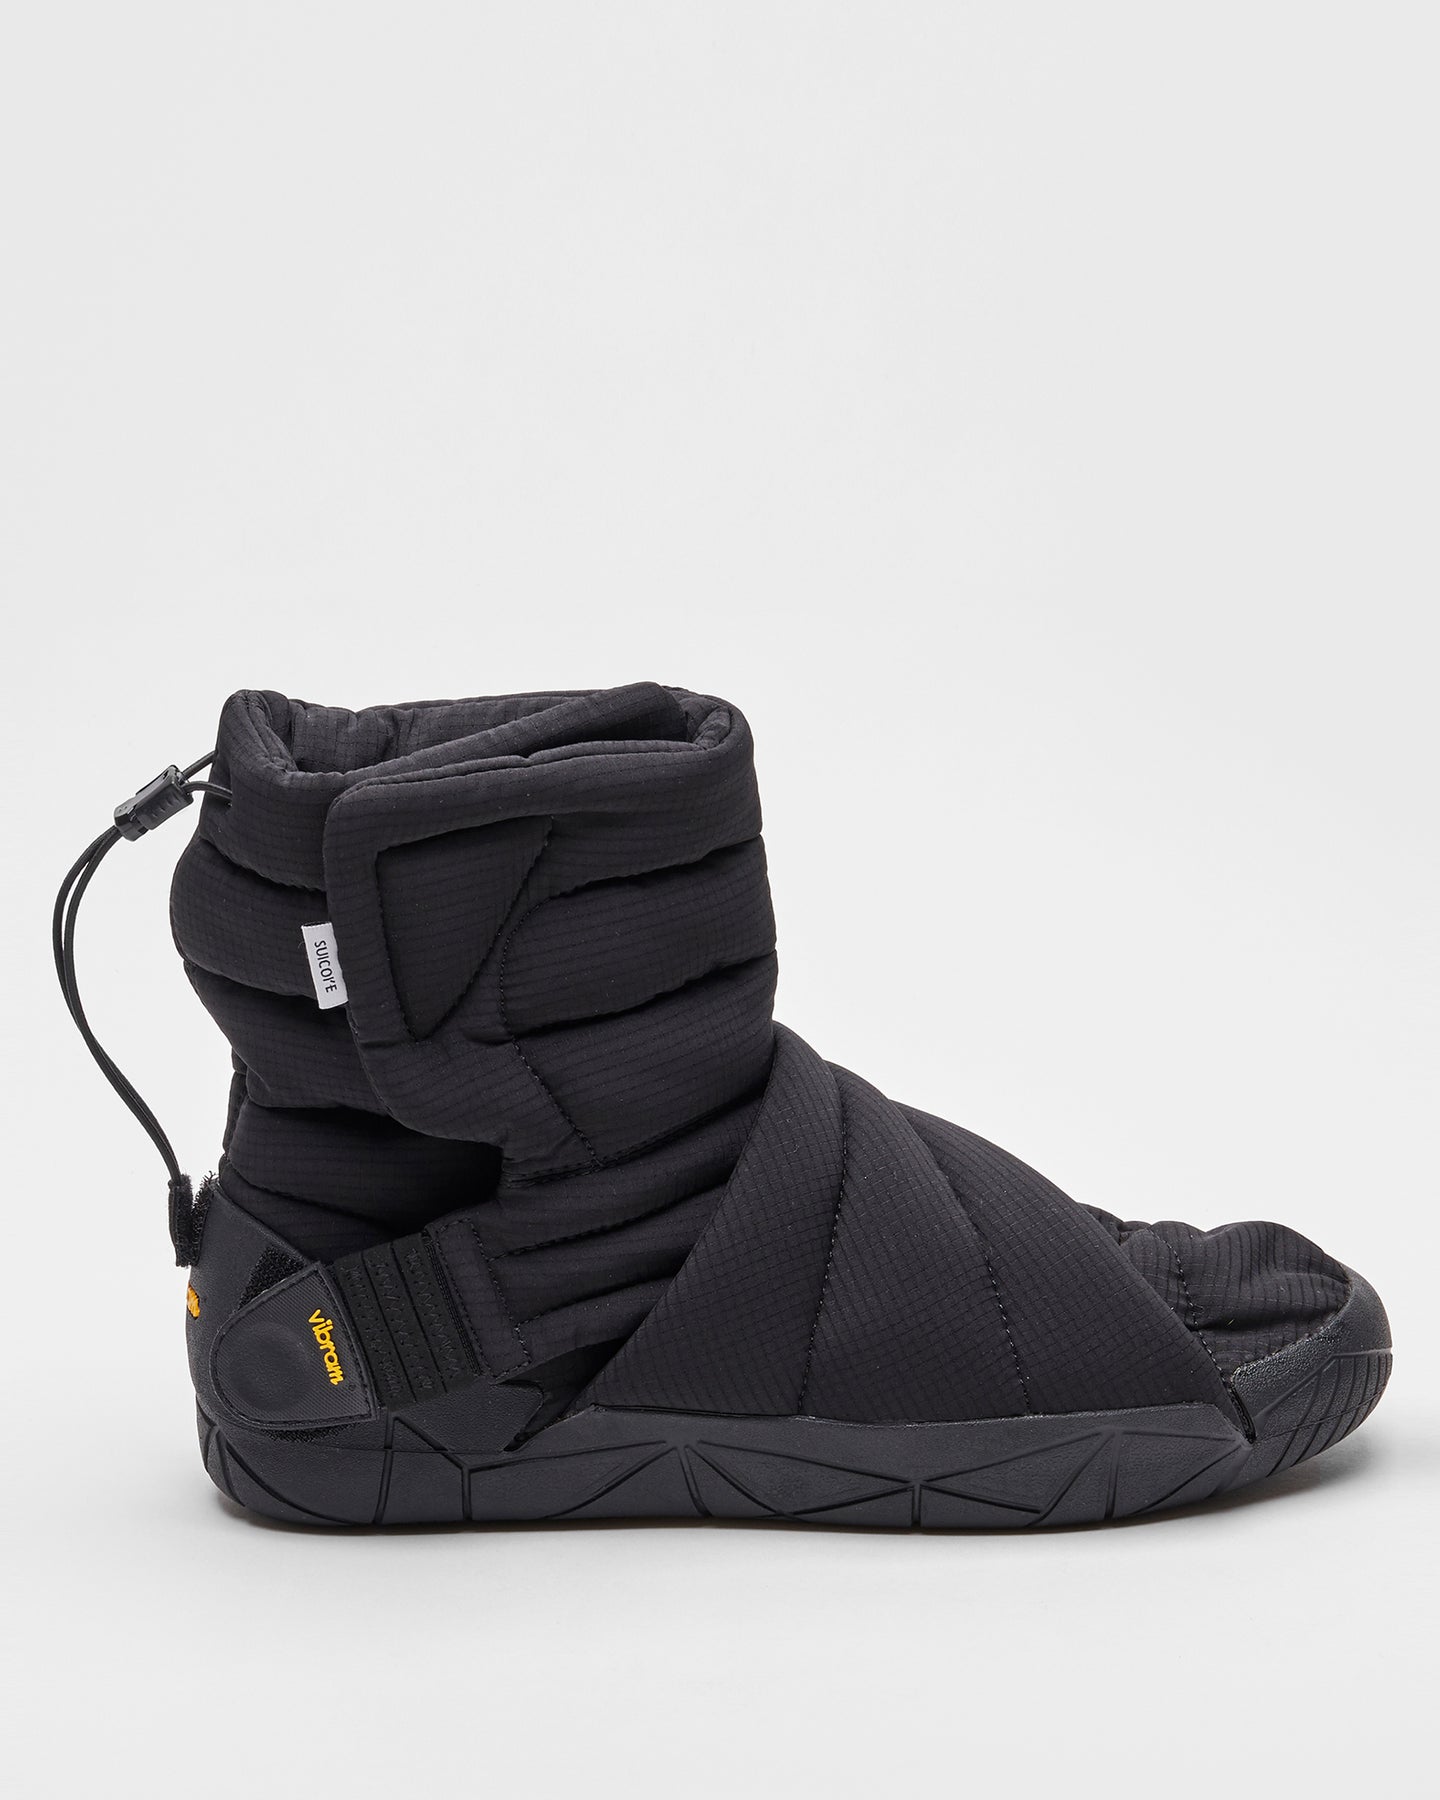 SUICOKE Furoshiki FUTON-HI Women’s low top ankle boots with black upper and Arctic Grip sole. From Fall/Winter 2023 collection on SUICOKE Official US & Canada Webstore. S22WFH BLACK